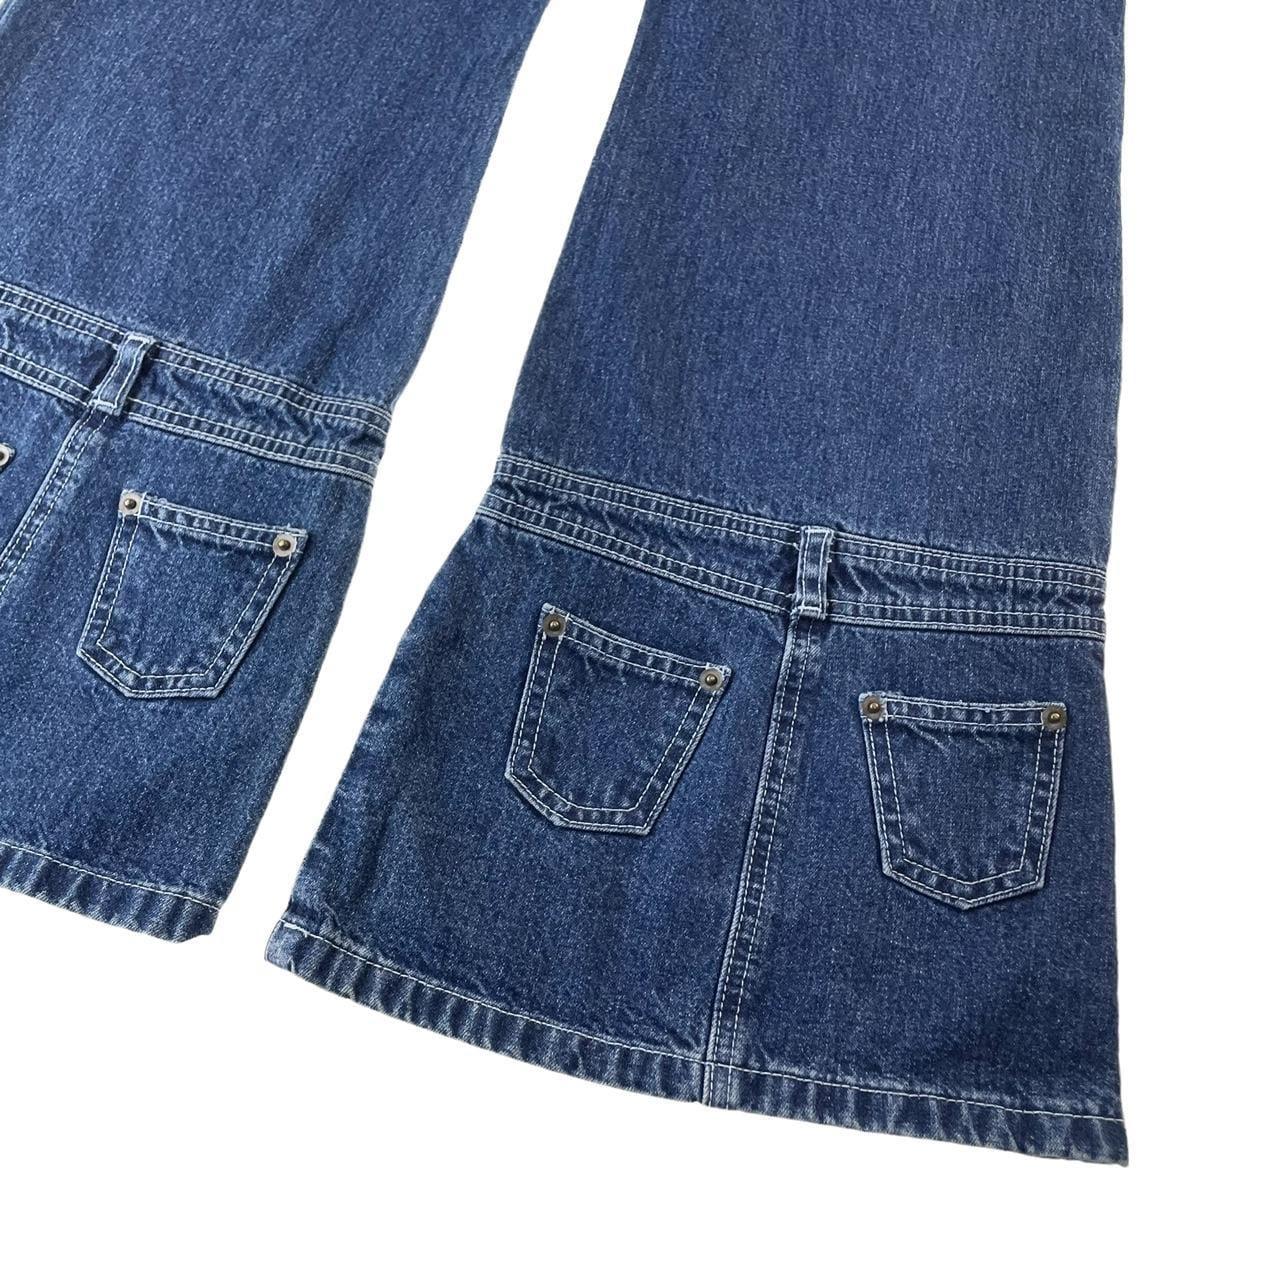 Vintage Mini skirts flared pocket jeans W28 - Known Source